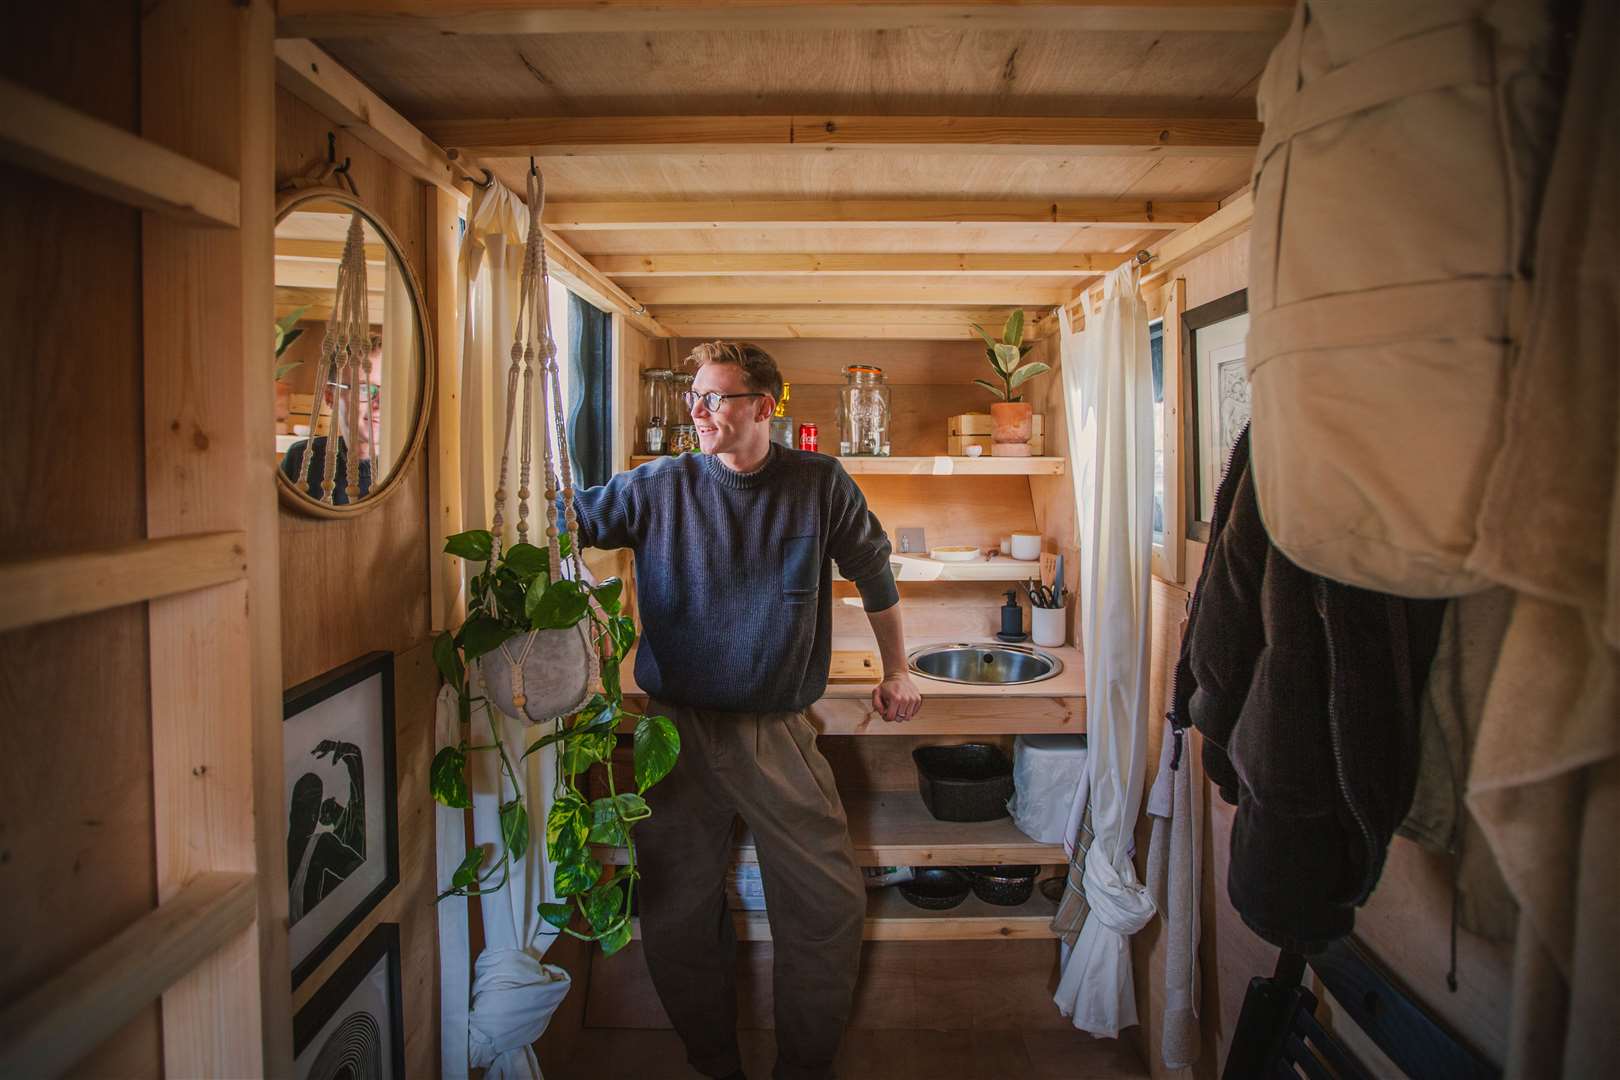 Harrison Marshall is aiming to live in the converted skip for a year (Katie Edwards/Skip House/PA)